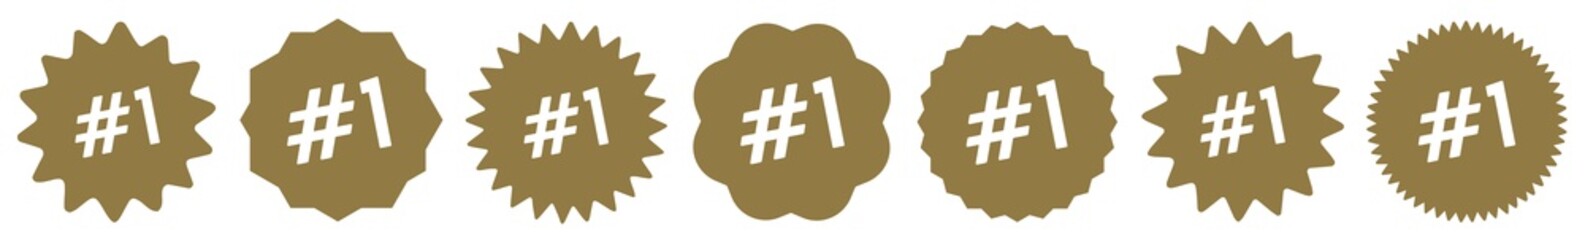 Number 1 Tag Gold | No 1 Icon | Sticker | Label | Variations